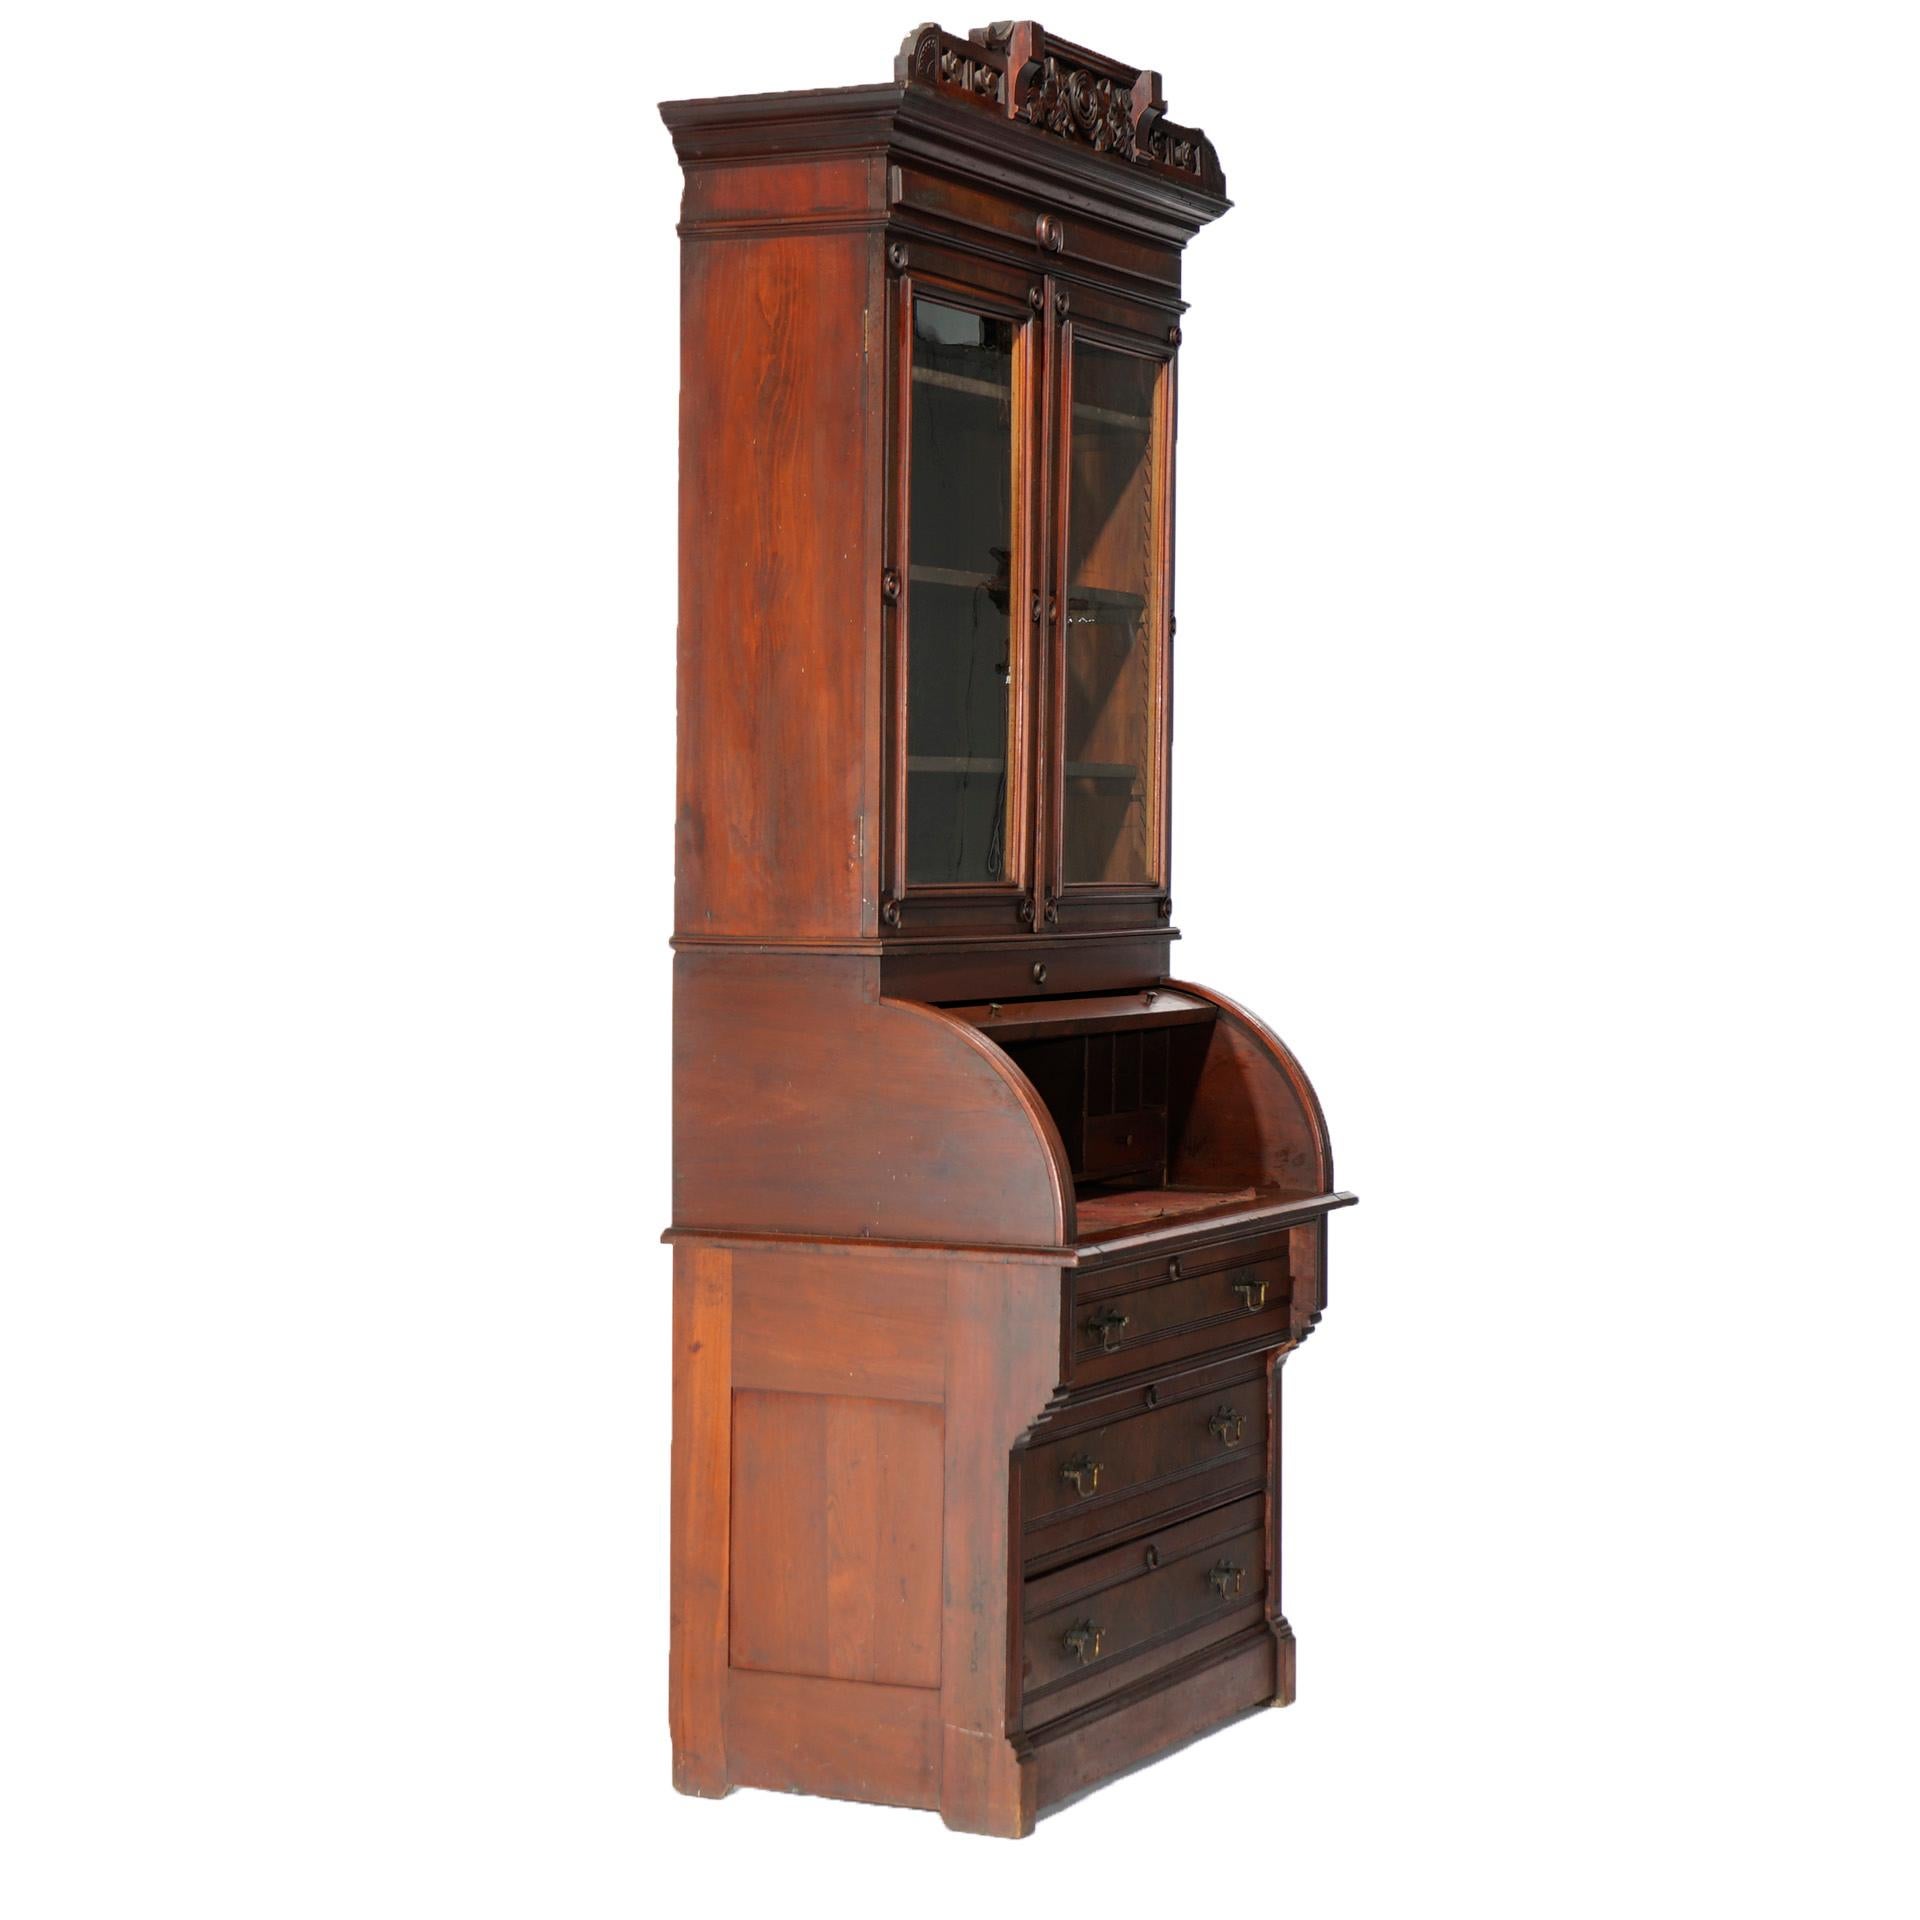 An antique Eastlake secretary offers walnut and burl construction with upper bookcase having carved crest with ivy decorated crest over double door case with adjustable shelf interior surmounting lower case with barrel roll desk opening to interior